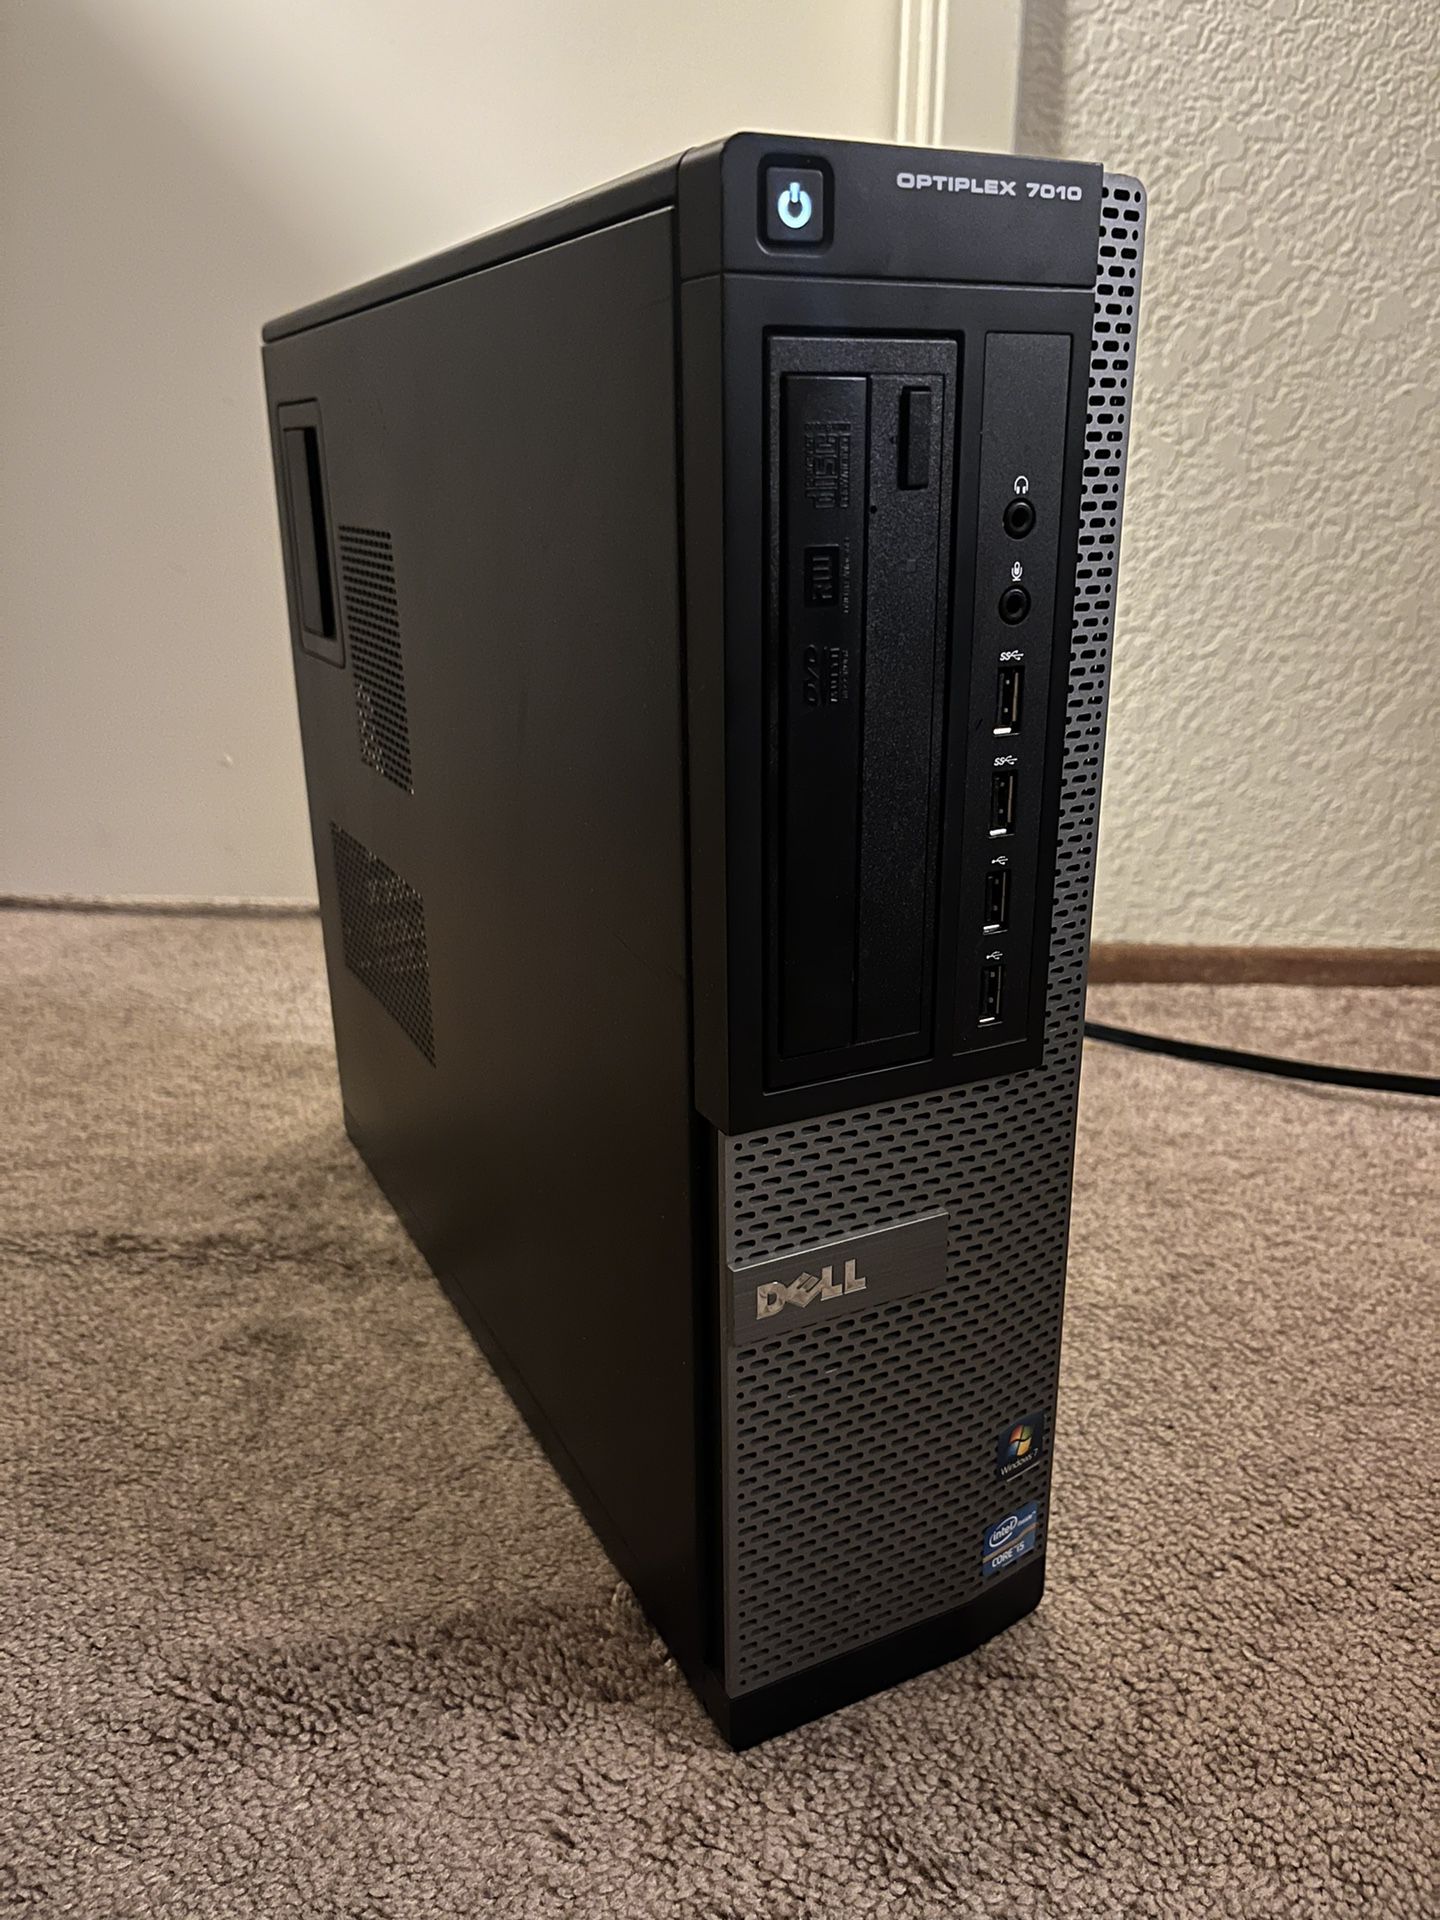 Dell Optiplex 7010 Desktop Computer PC w/ Monitor, Keyboard, and Mouse